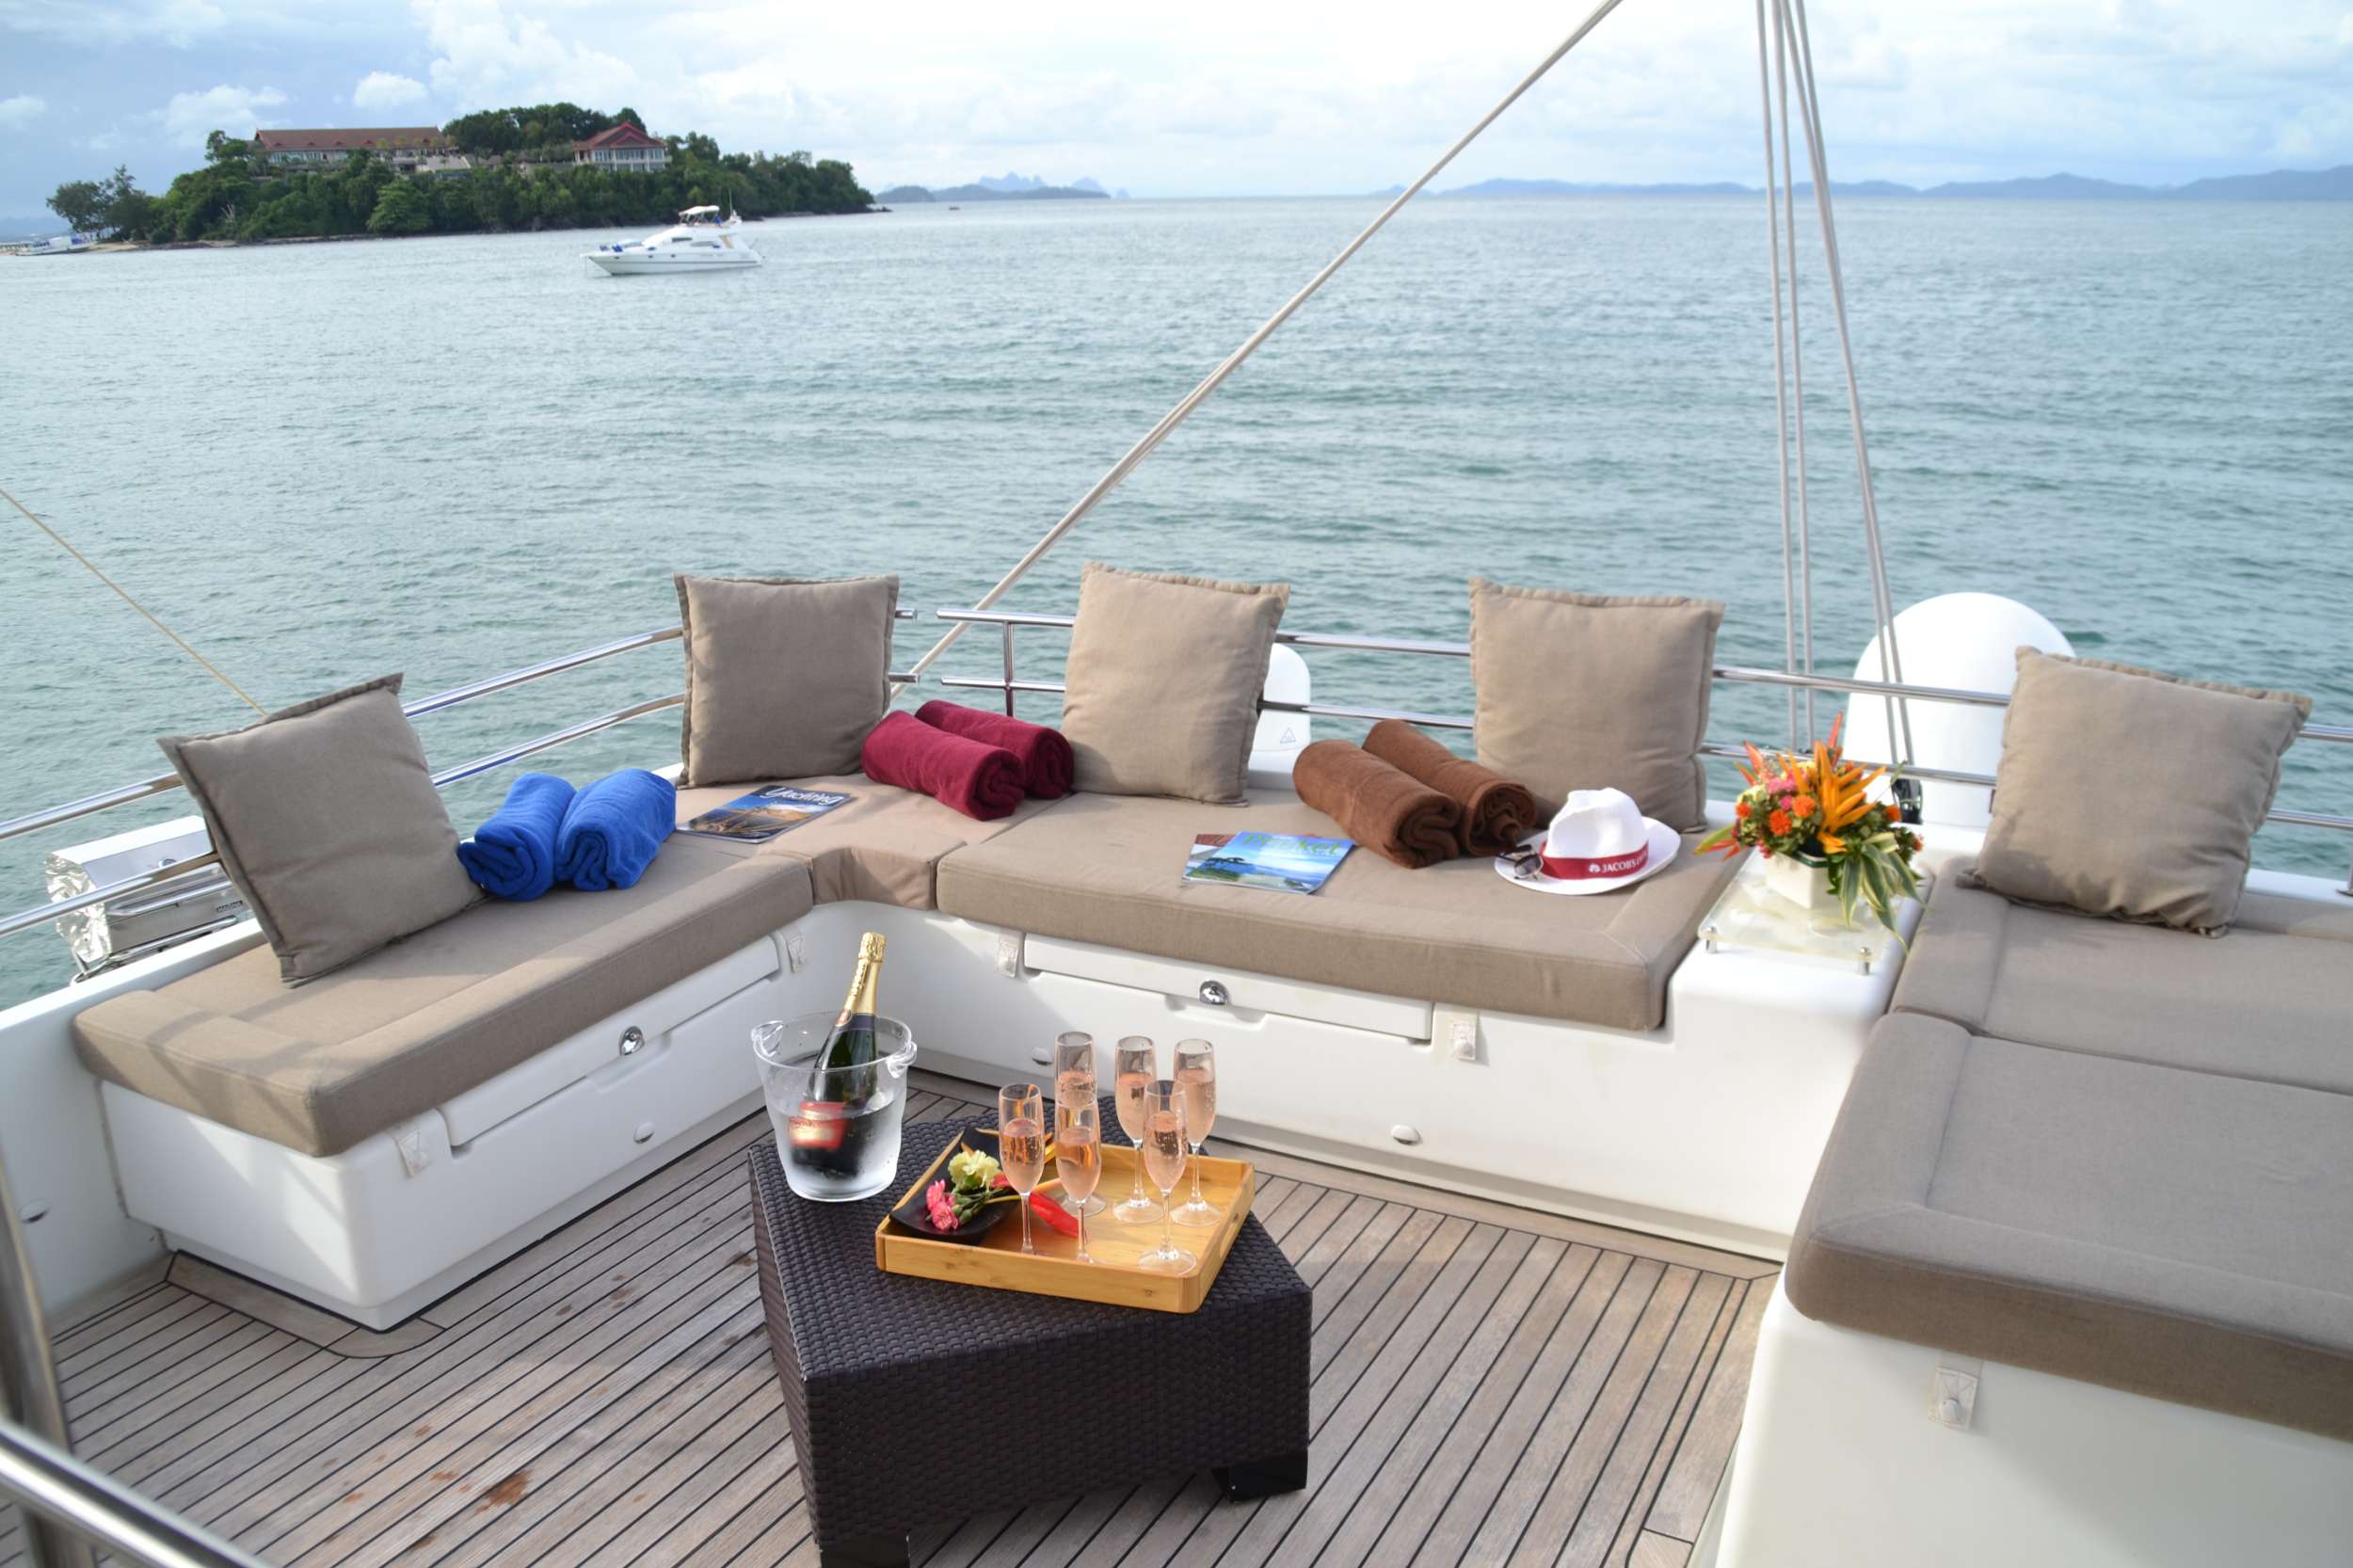 00SEVEN - Yacht Charter Philippines & Boat hire in SE Asia 5